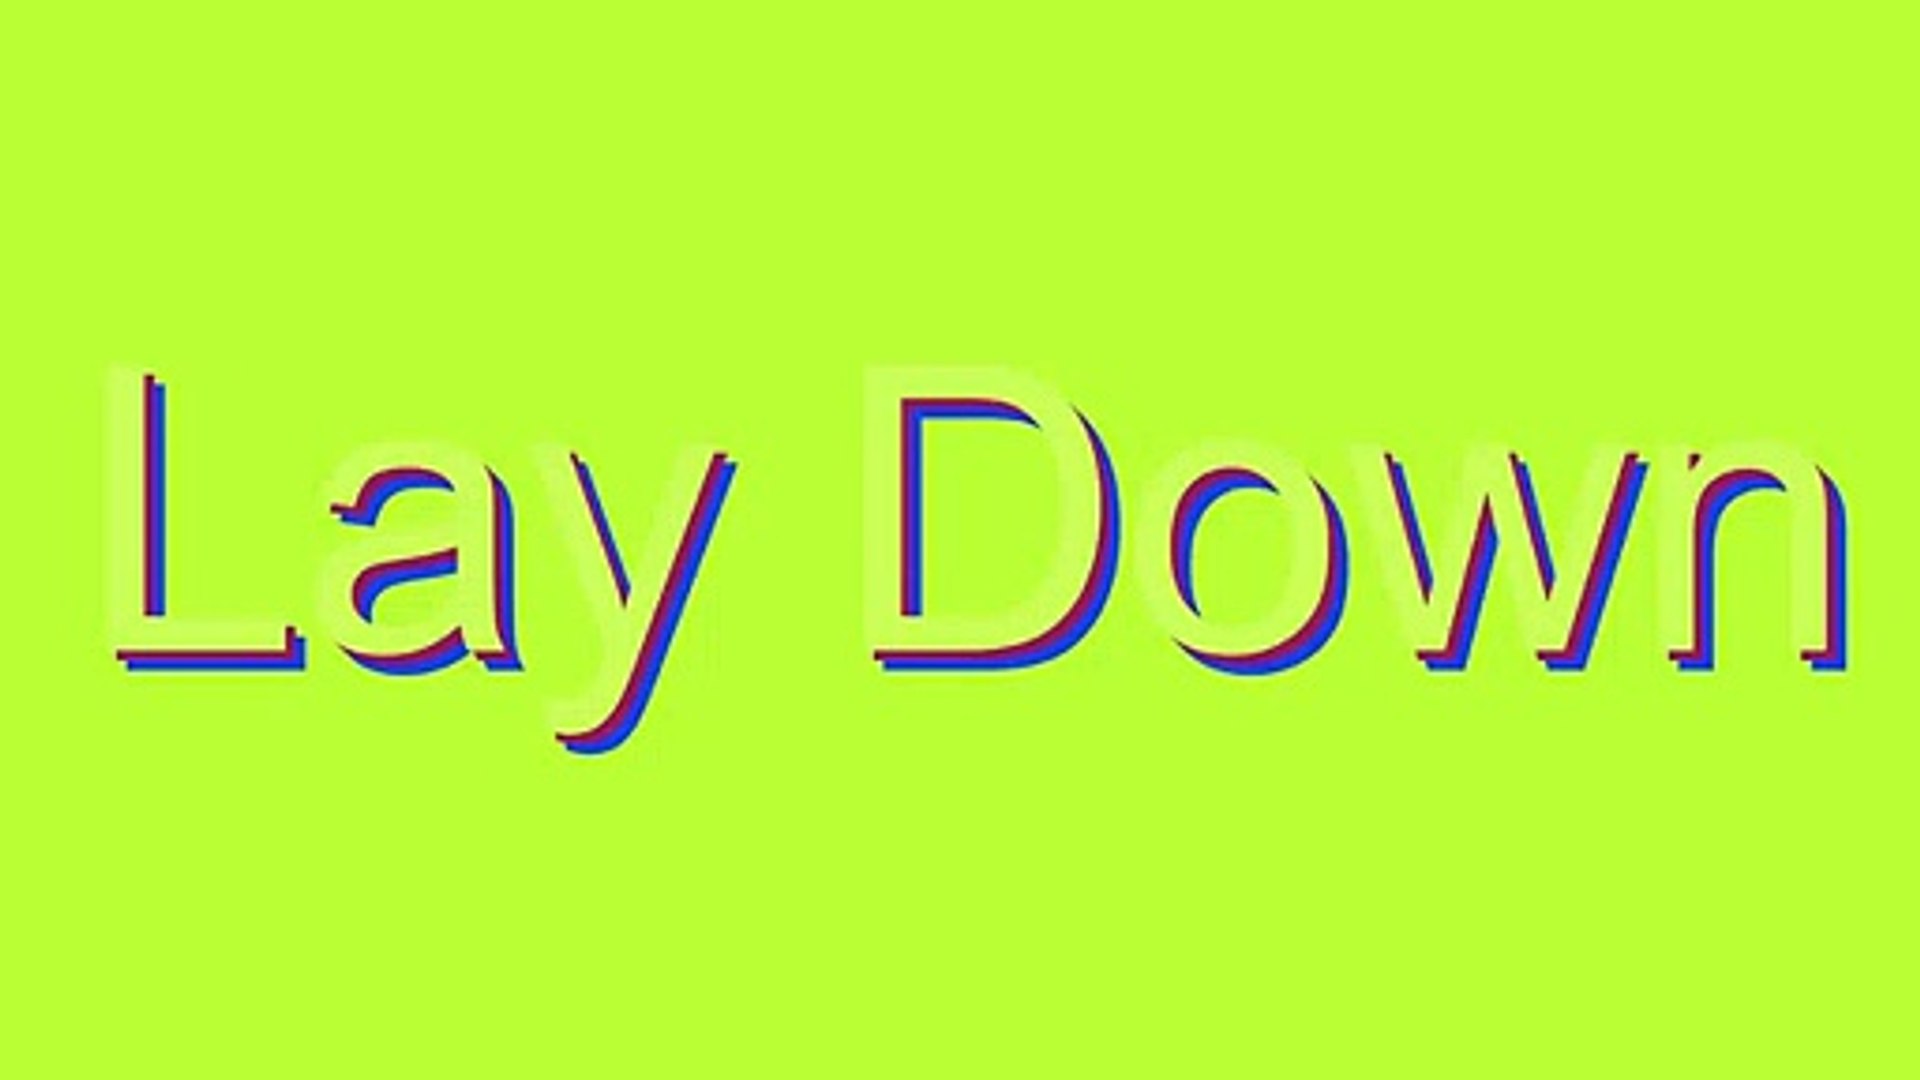 How to pronounce Down 